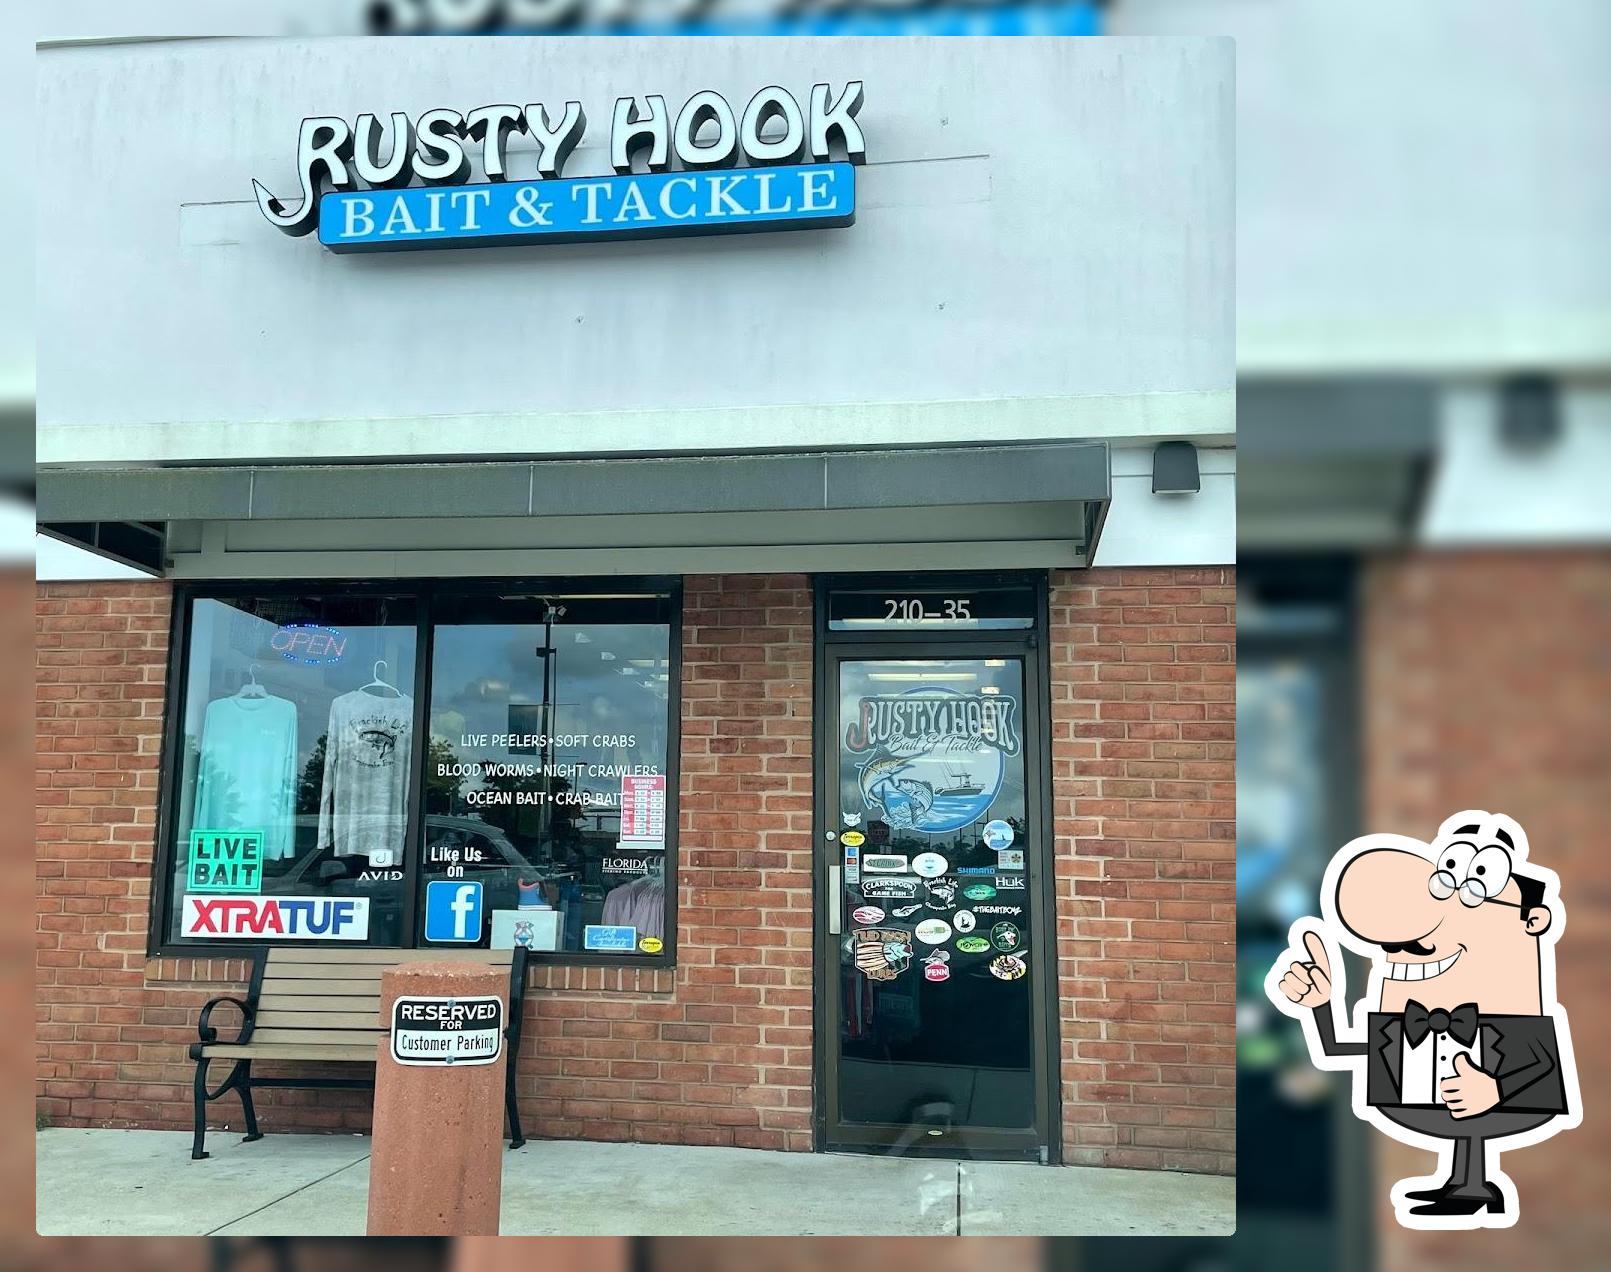 Rusty Hook Bait & Tackle in Easton - Restaurant reviews